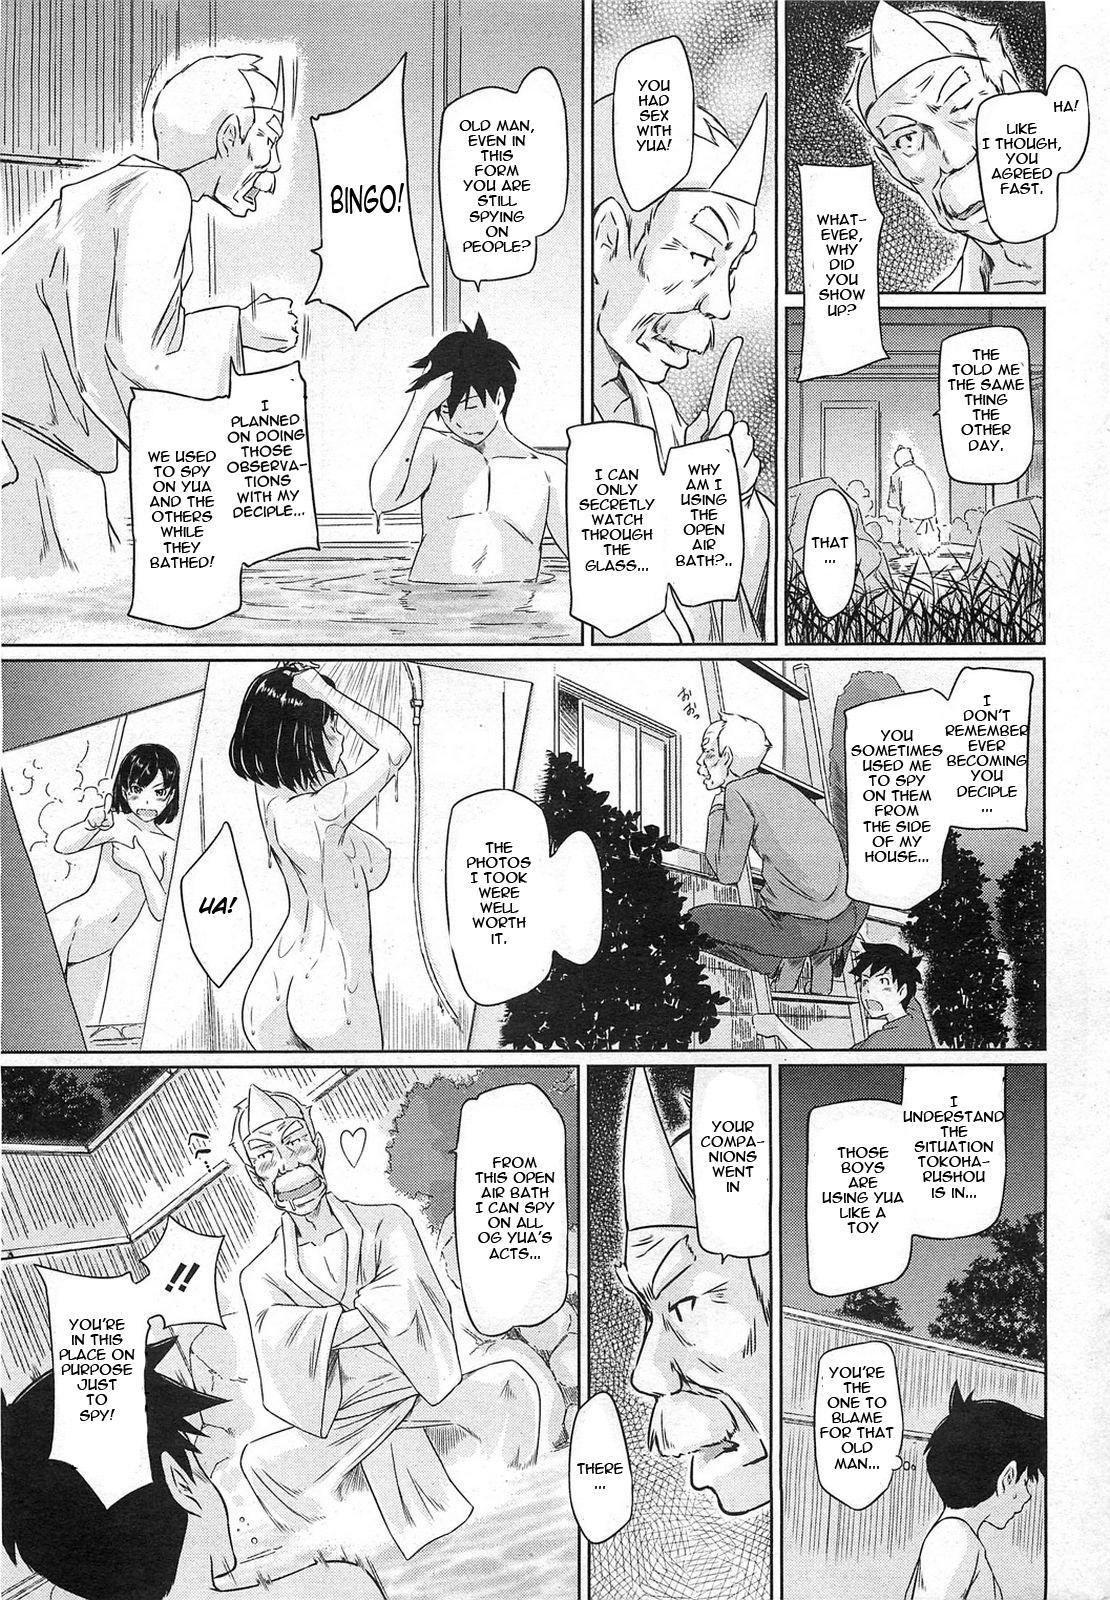 Spy Camera Welcome to Tokoharusou Chapter 2 Ejaculations - Page 11